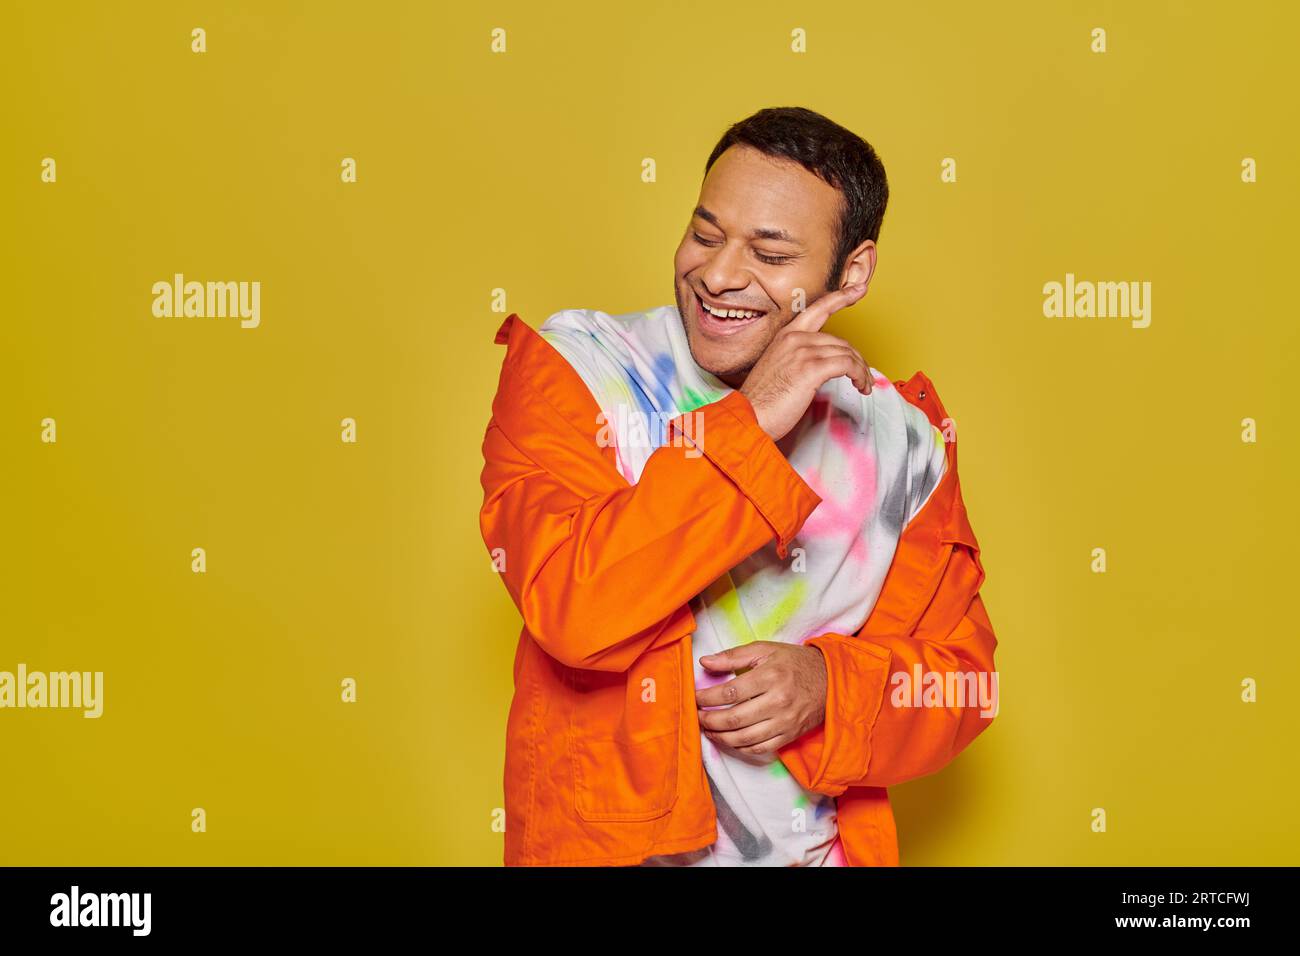 gleeful indian man in orange jacket and diy t-shirt smiling with closed eyes on yellow backdrop Stock Photo